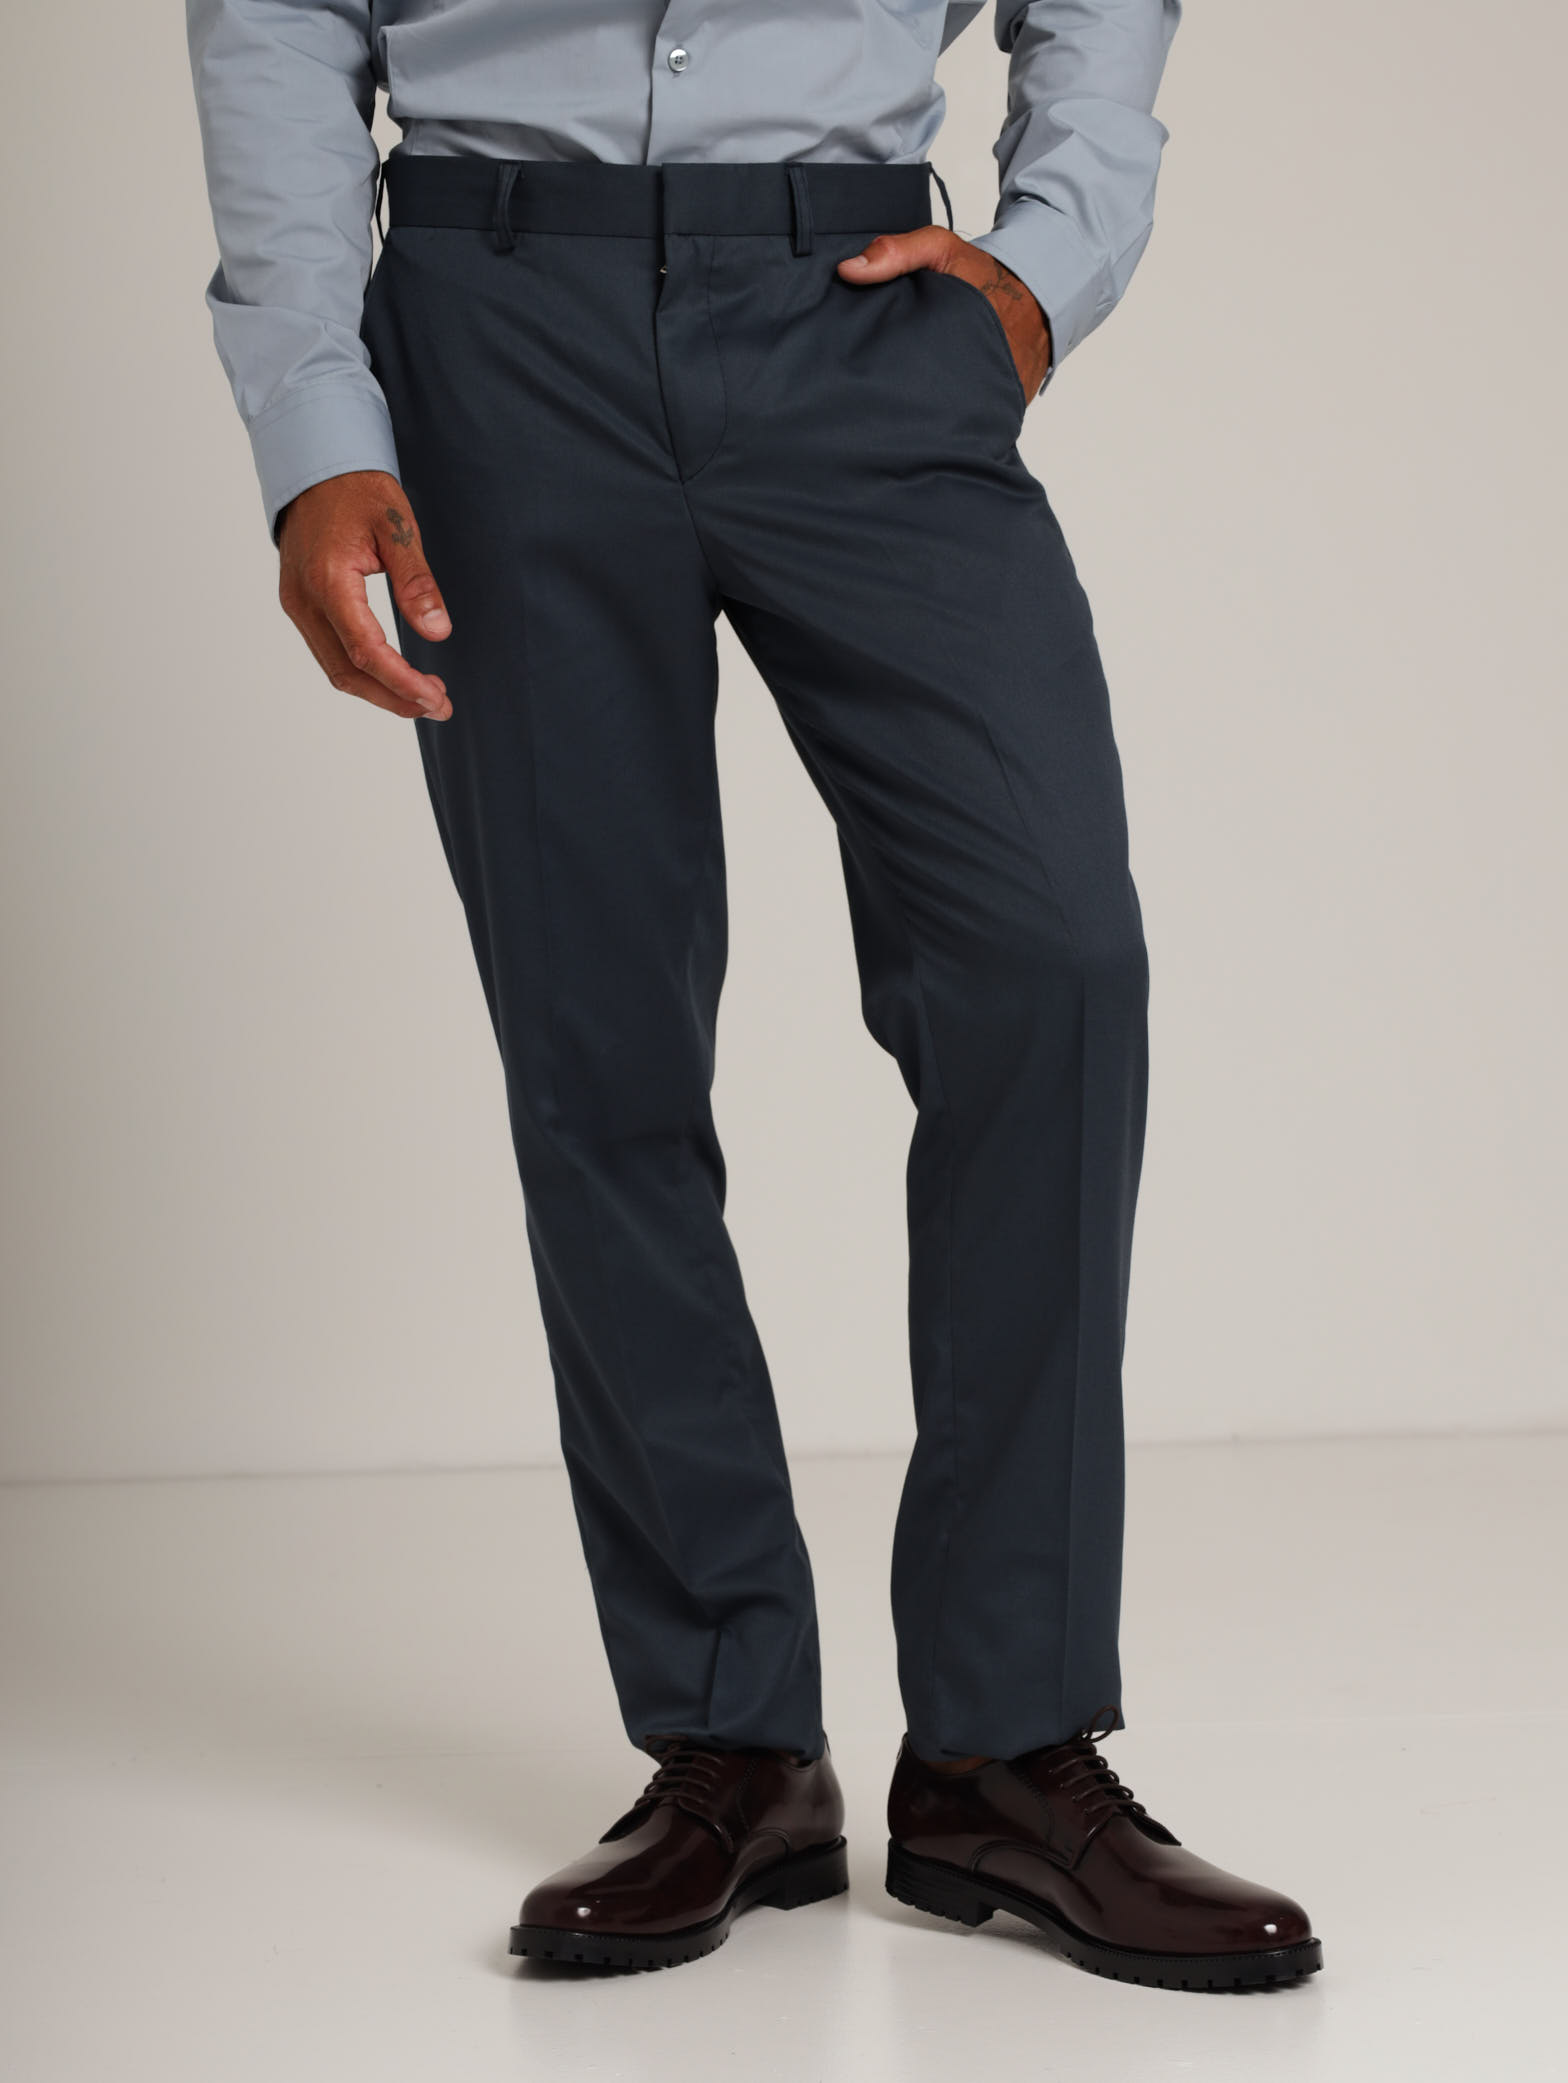 Navy Blue Formal Trouser For Men | Office Wear Pants For Men – Dilutee India